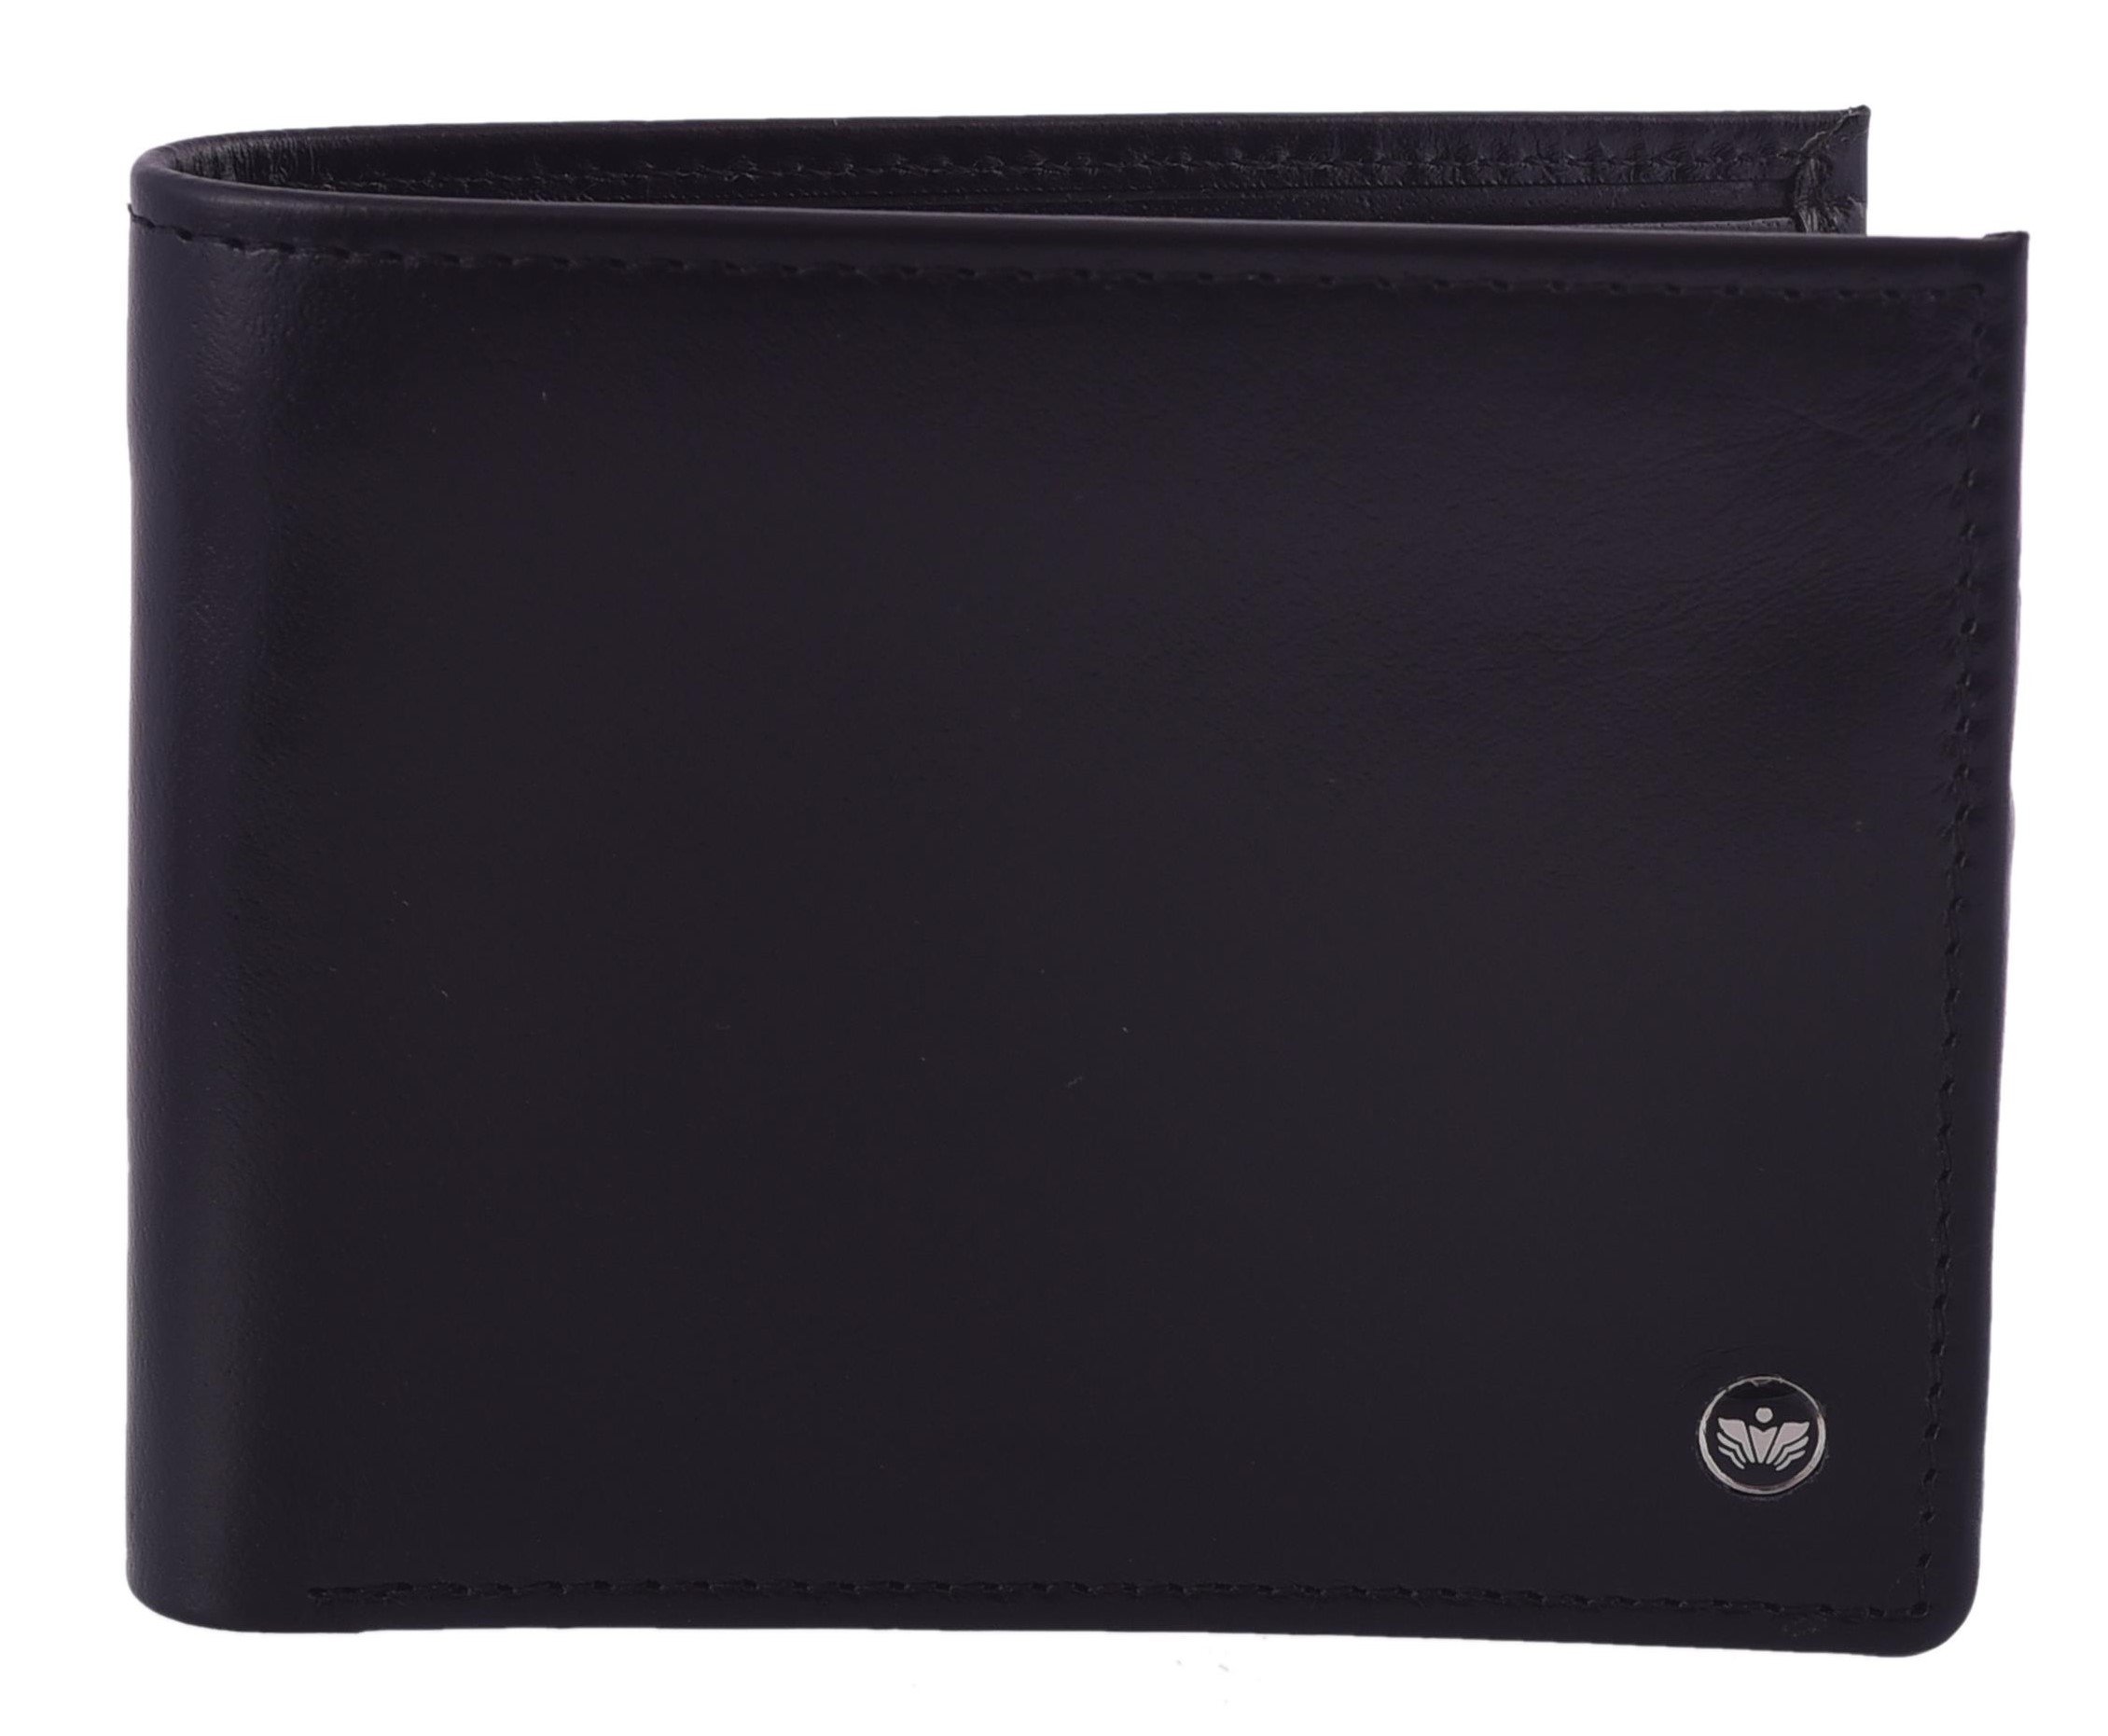 Black Shiny Solid Leather Wallet